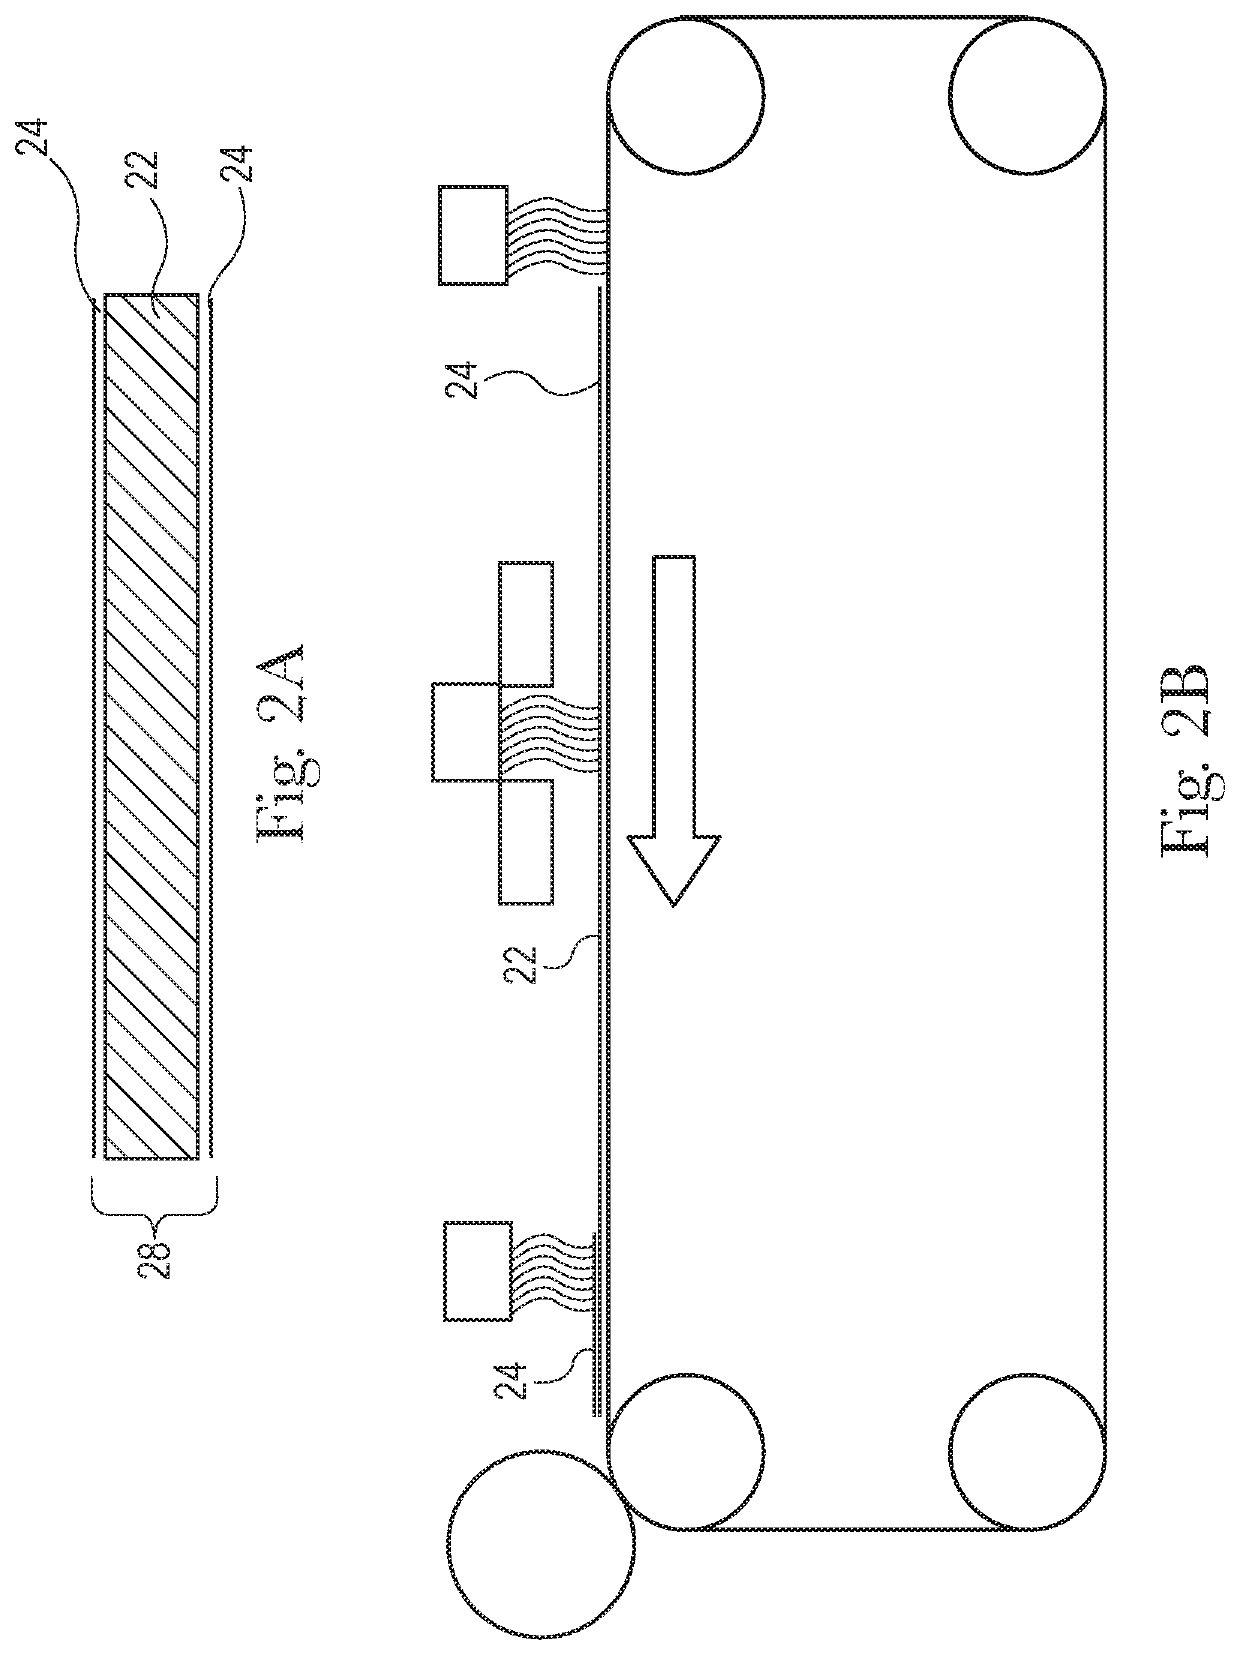 Multi-ply fibrous structure-containing articles